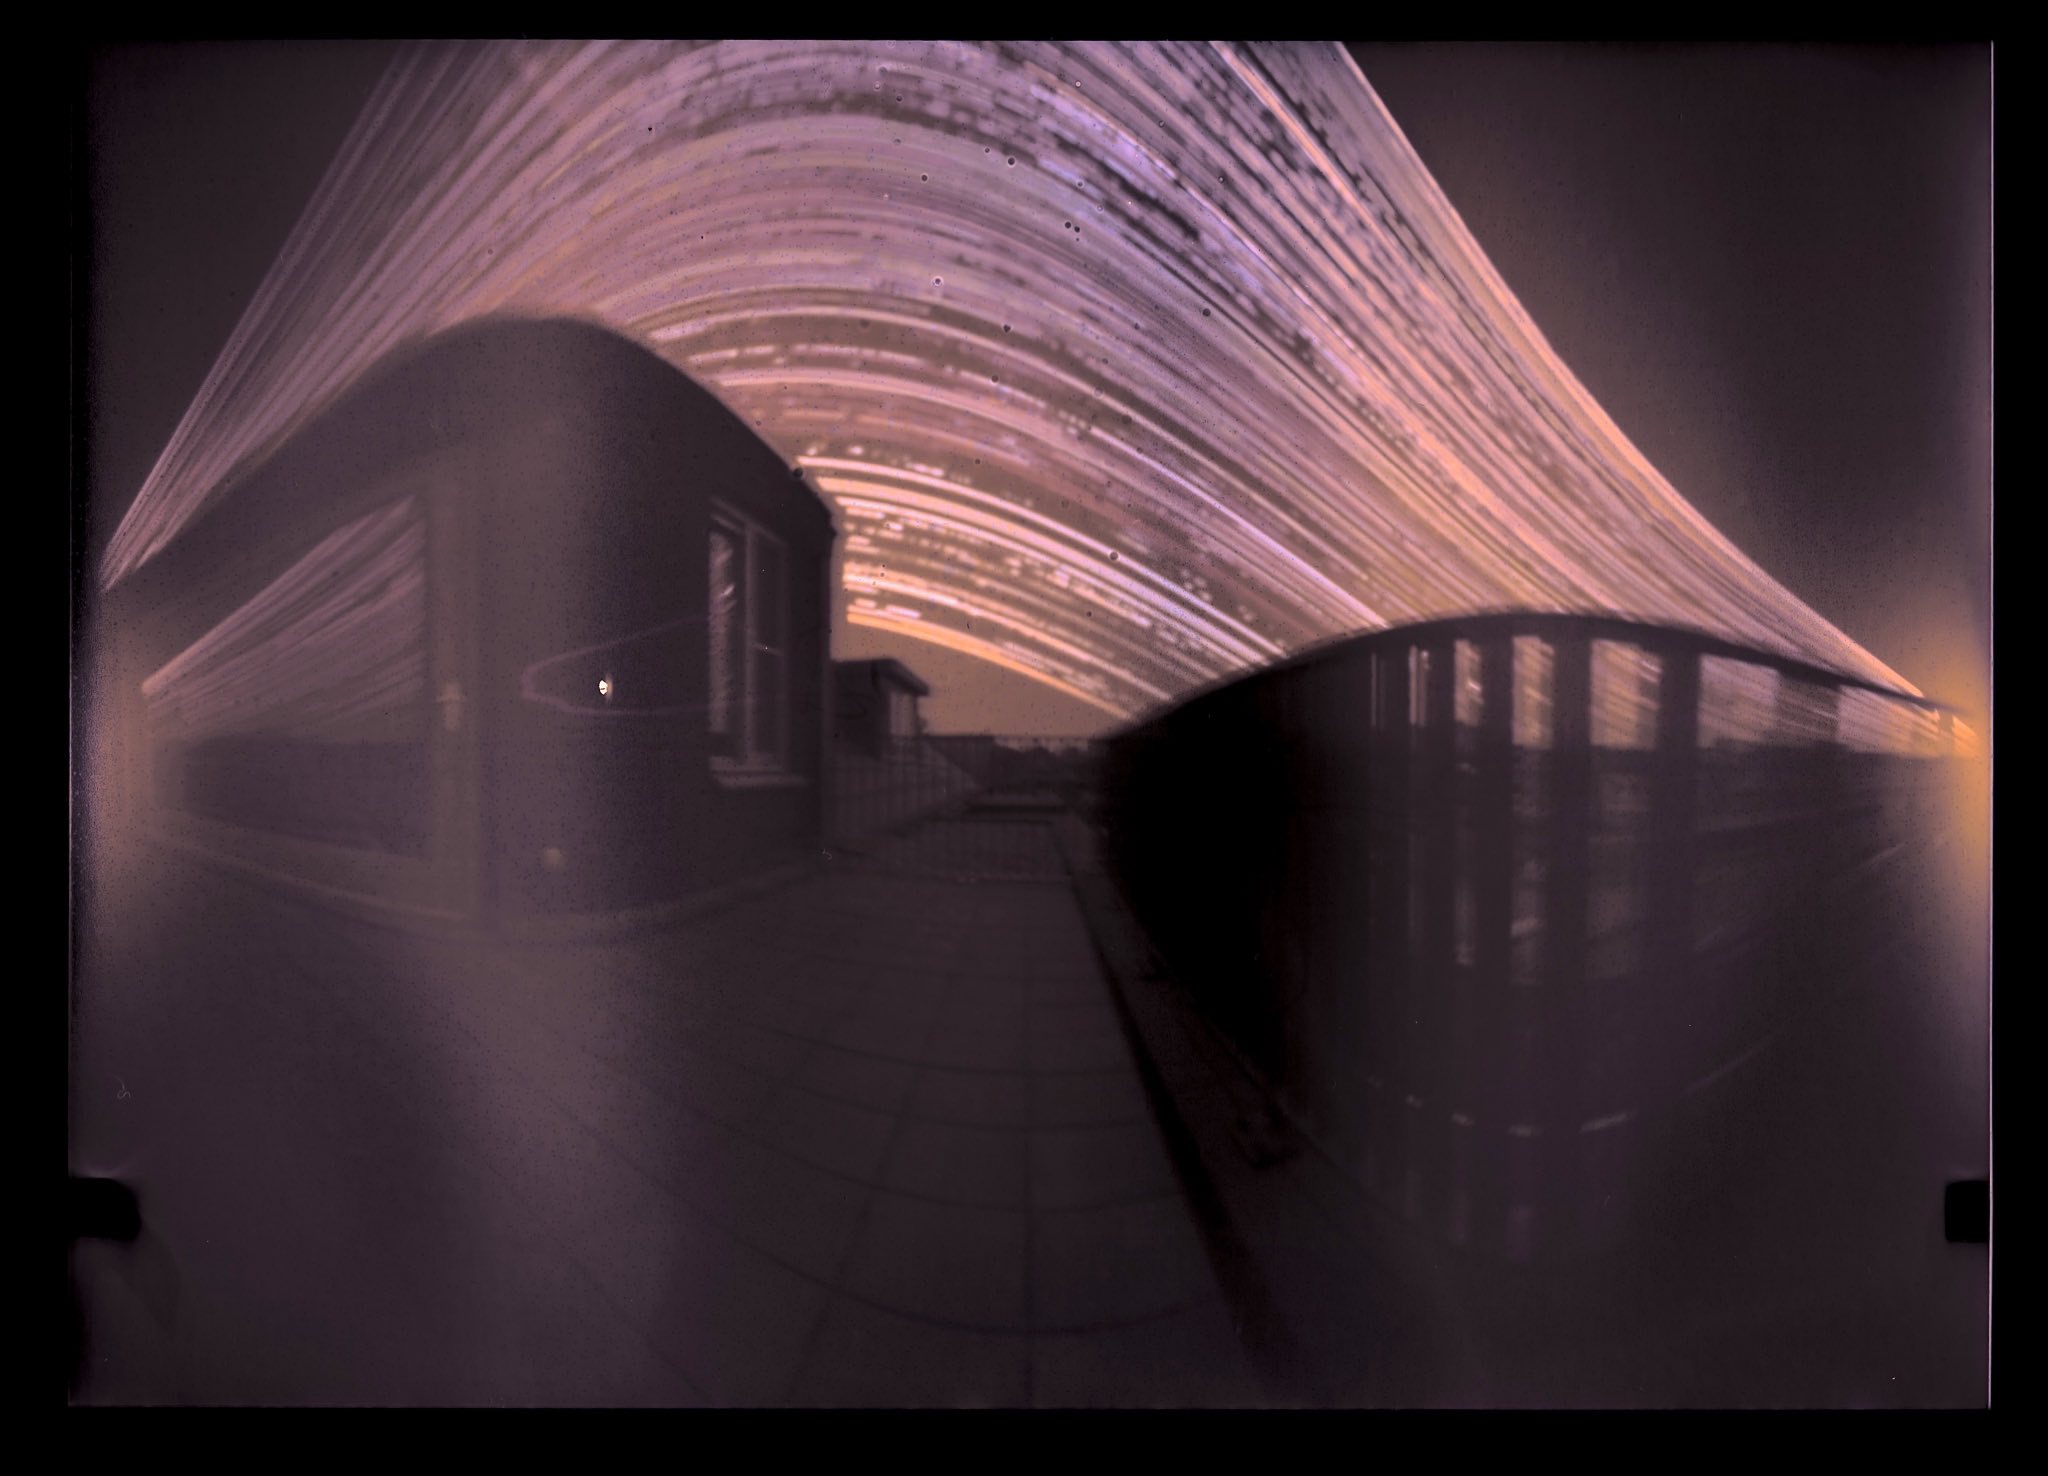 This image shows a long-exposure photo capturing sub trails in the sky above a building rooftop and a fence.